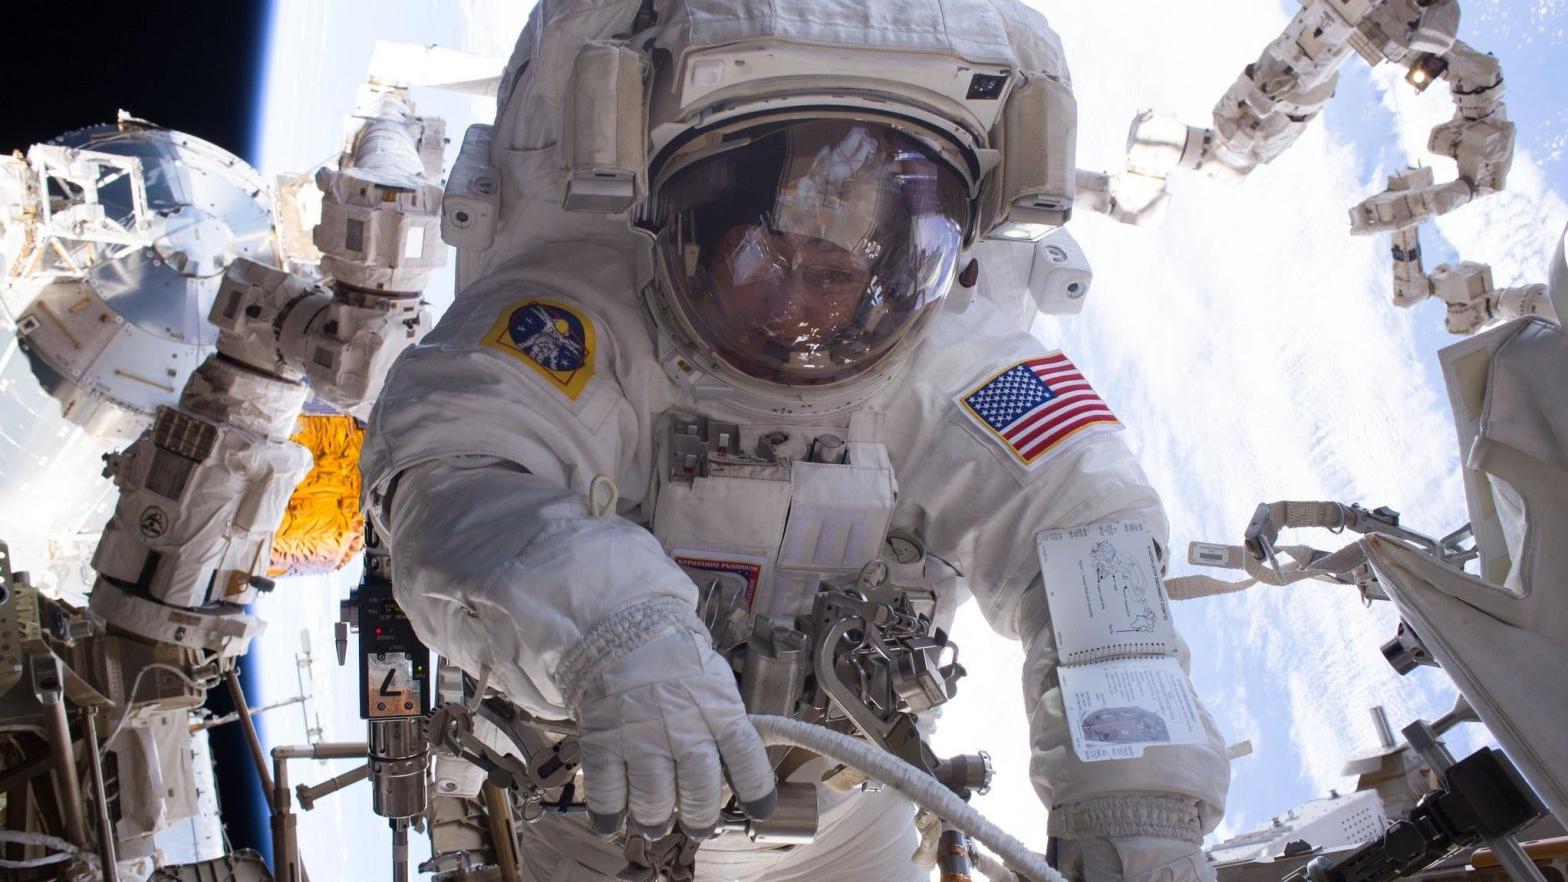 There have been more than 200 spacewalks outside the ISS since it launched in 1998. (Image: NASA)